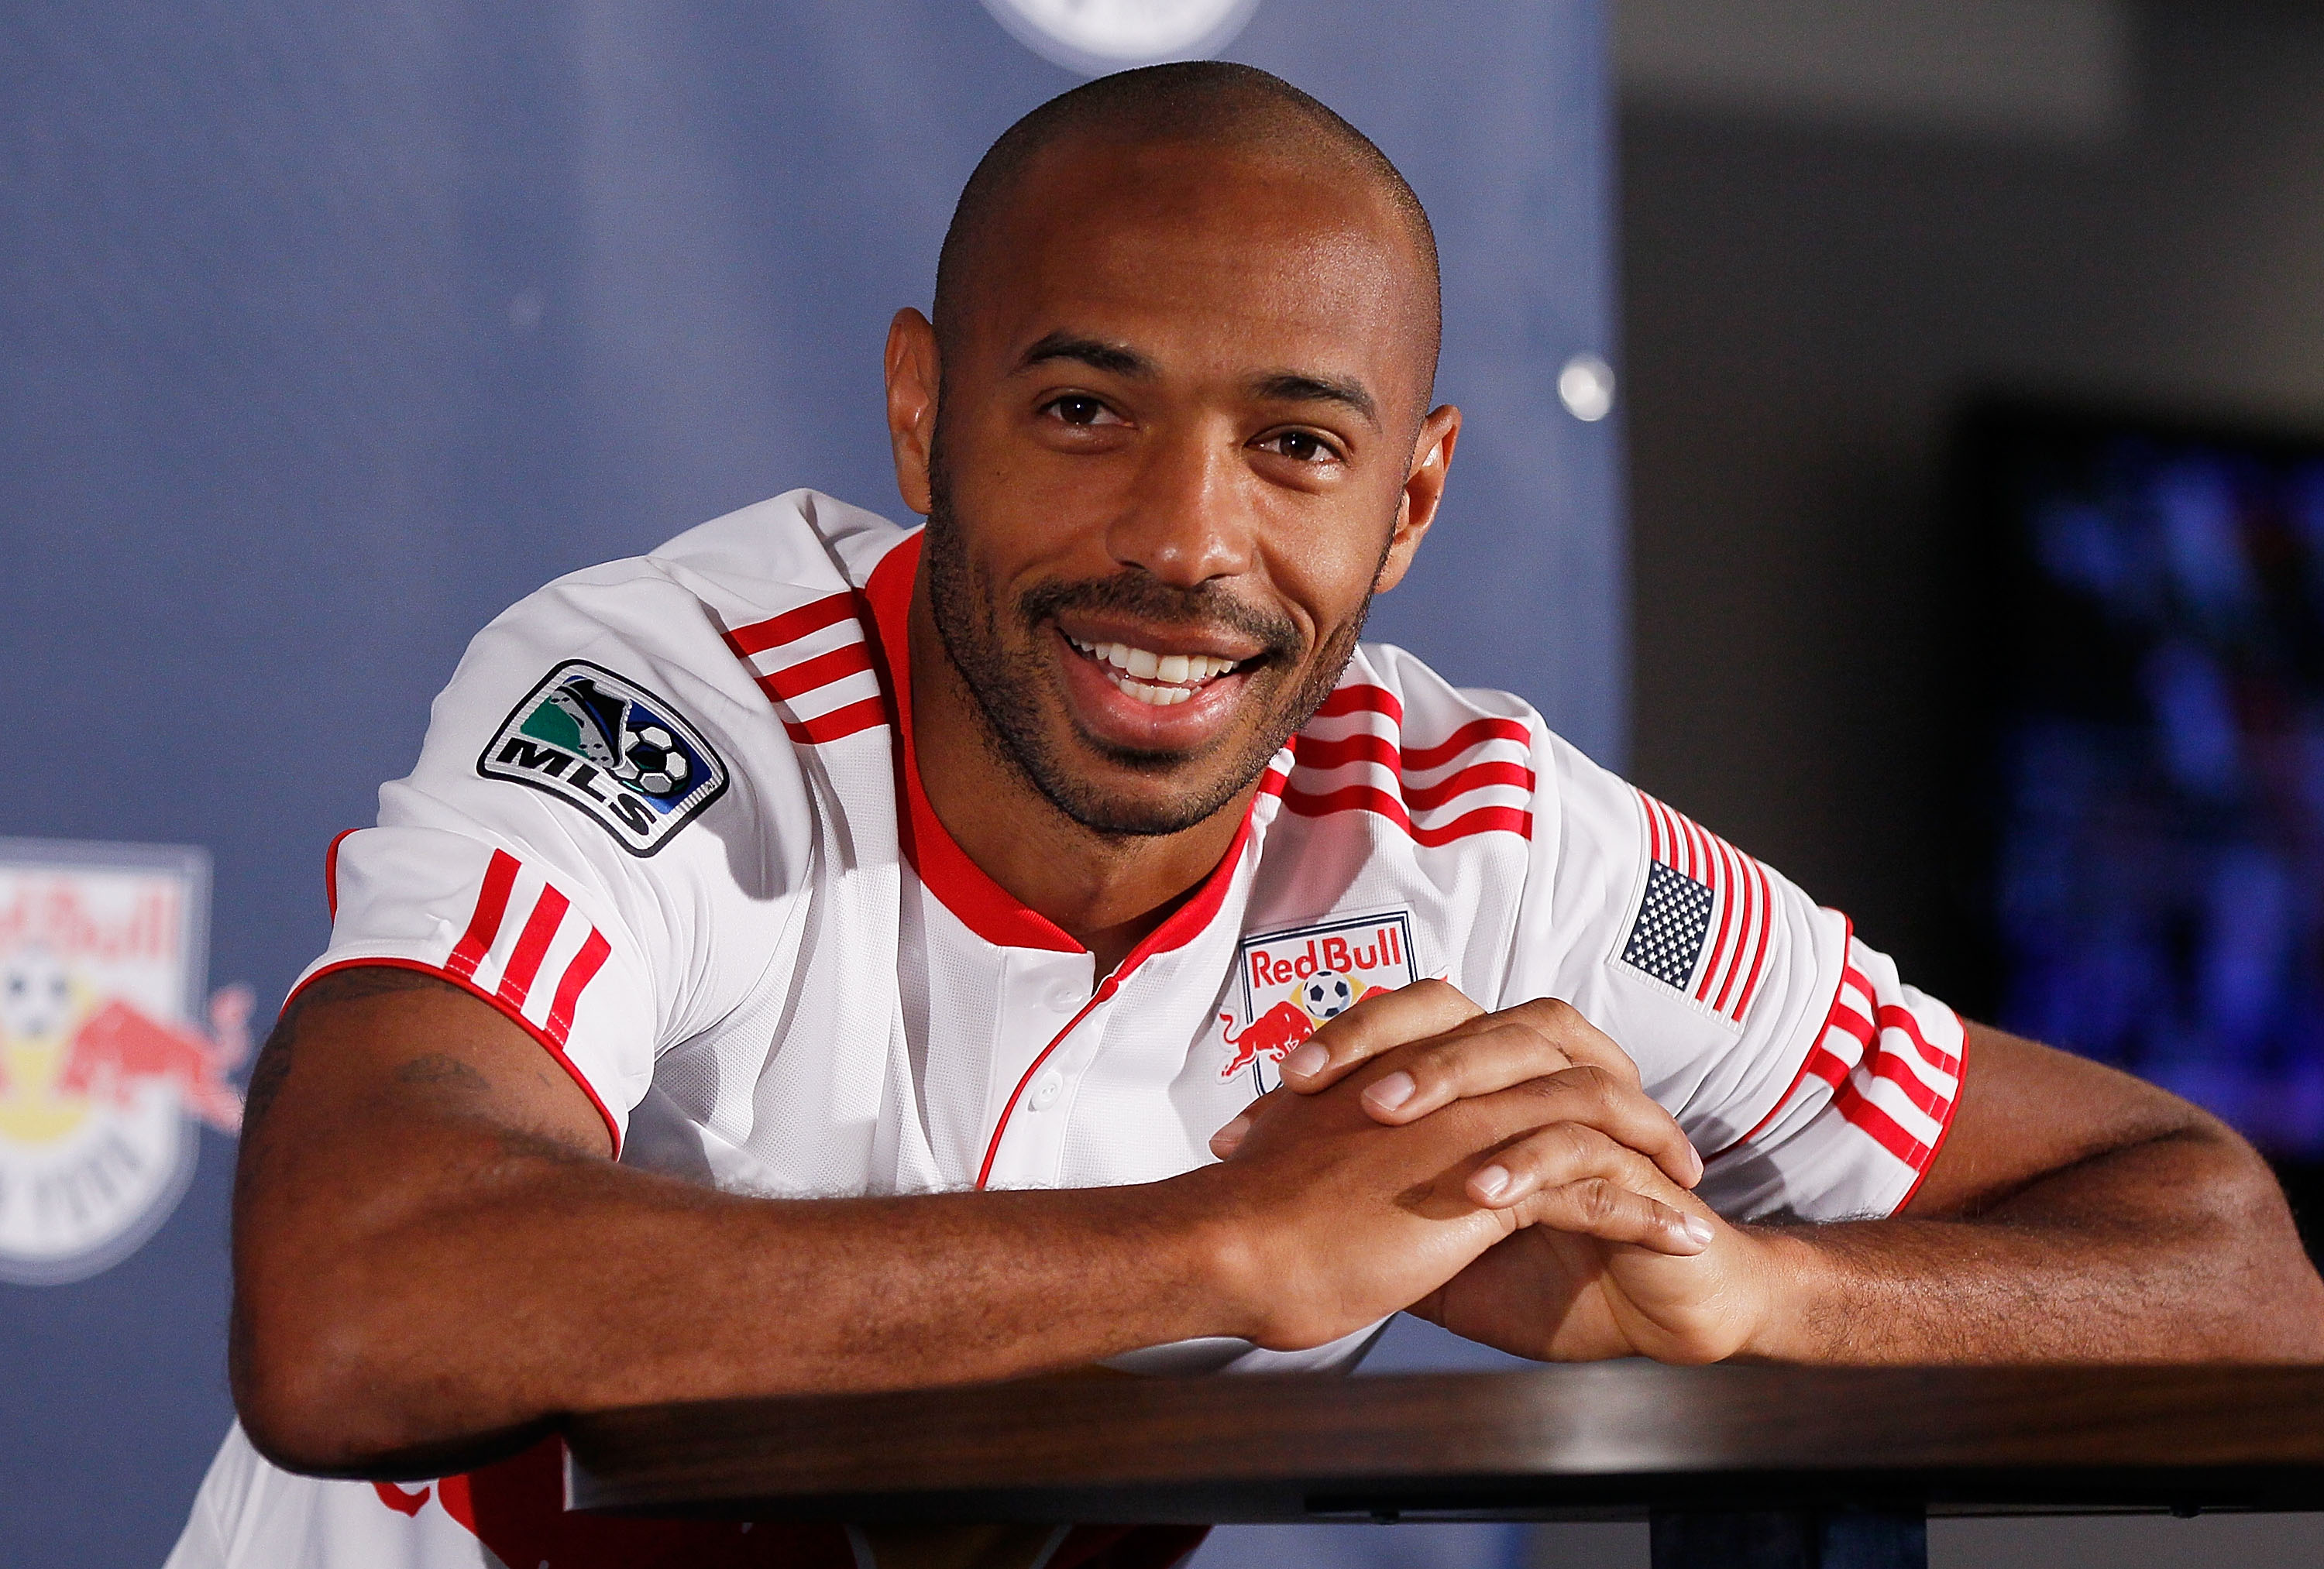 HARRISON, NJ - MARCH 15:  Thierry Henry #14 of the New York Red Bulls speaks to the media on March 15, 2010 at Red Bull Arena in Harrison, New Jersey.  (Photo by Mike Stobe/Getty Images for New York Red Bulls)